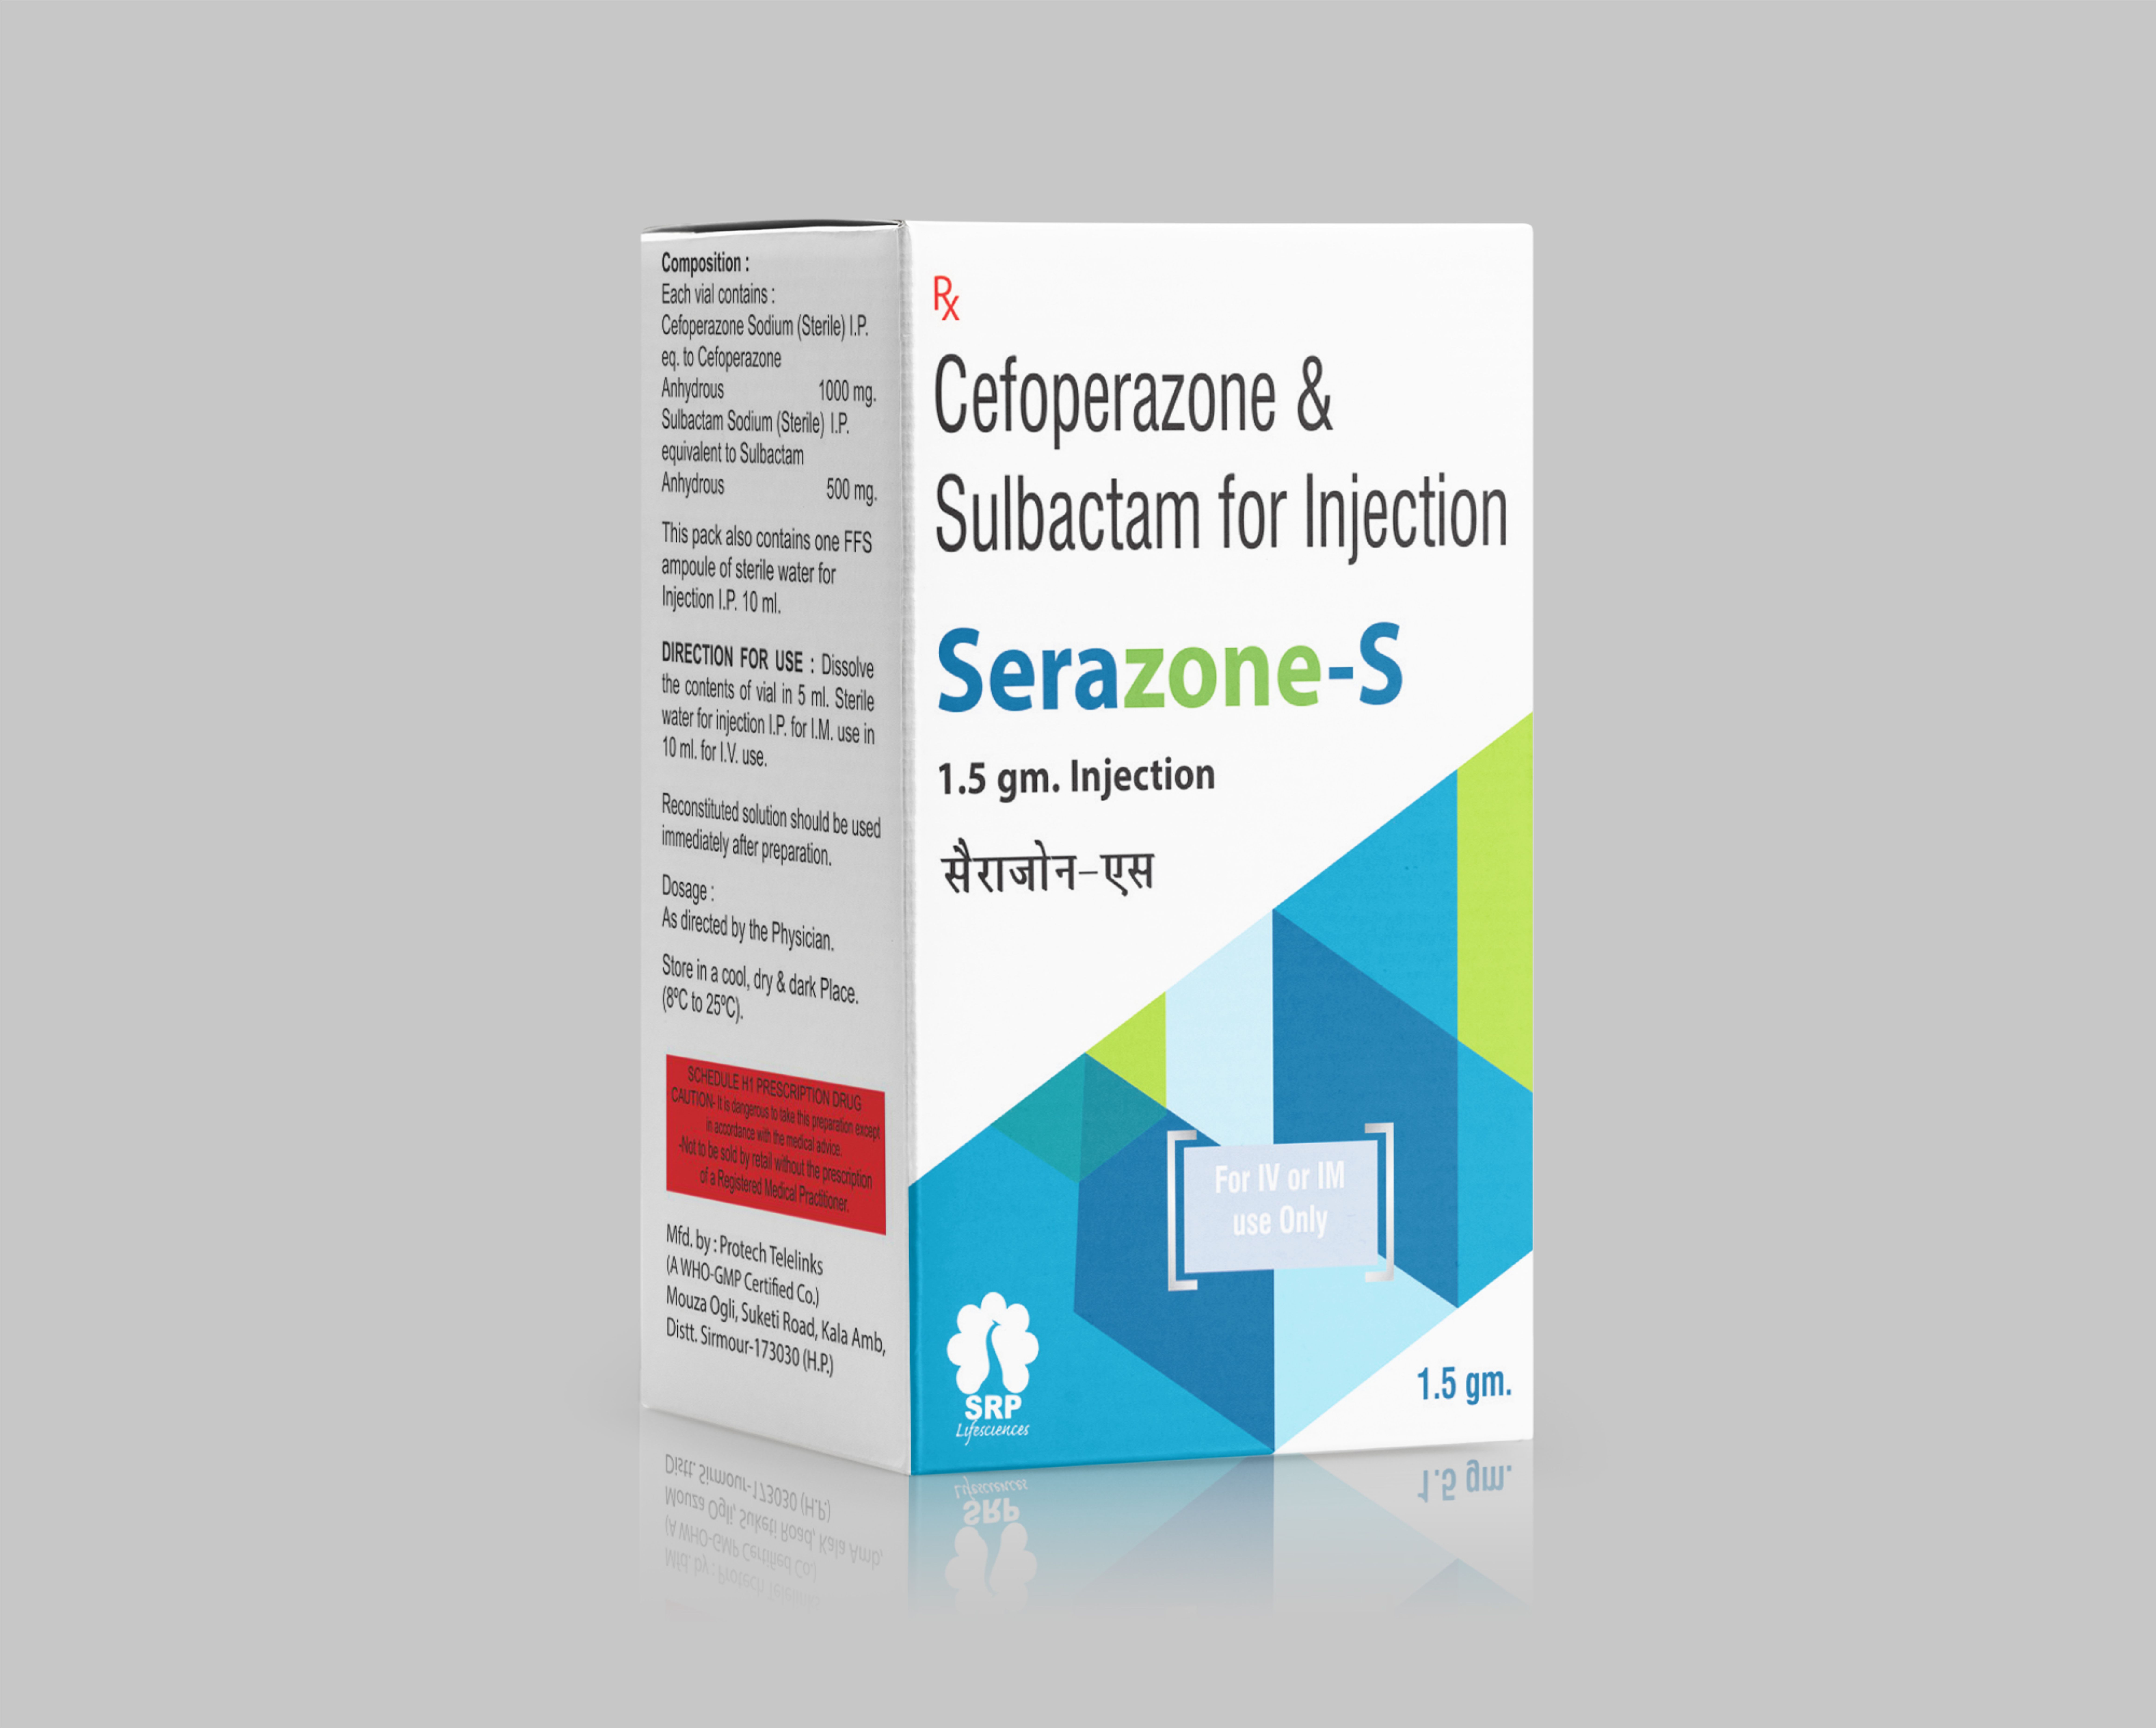 Product Name: CERAZONE S 1.5  injection, Compositions of Cefoperazone & Sulbactam for injection are Cefoperazone & Sulbactam for injection - Cynak Healthcare